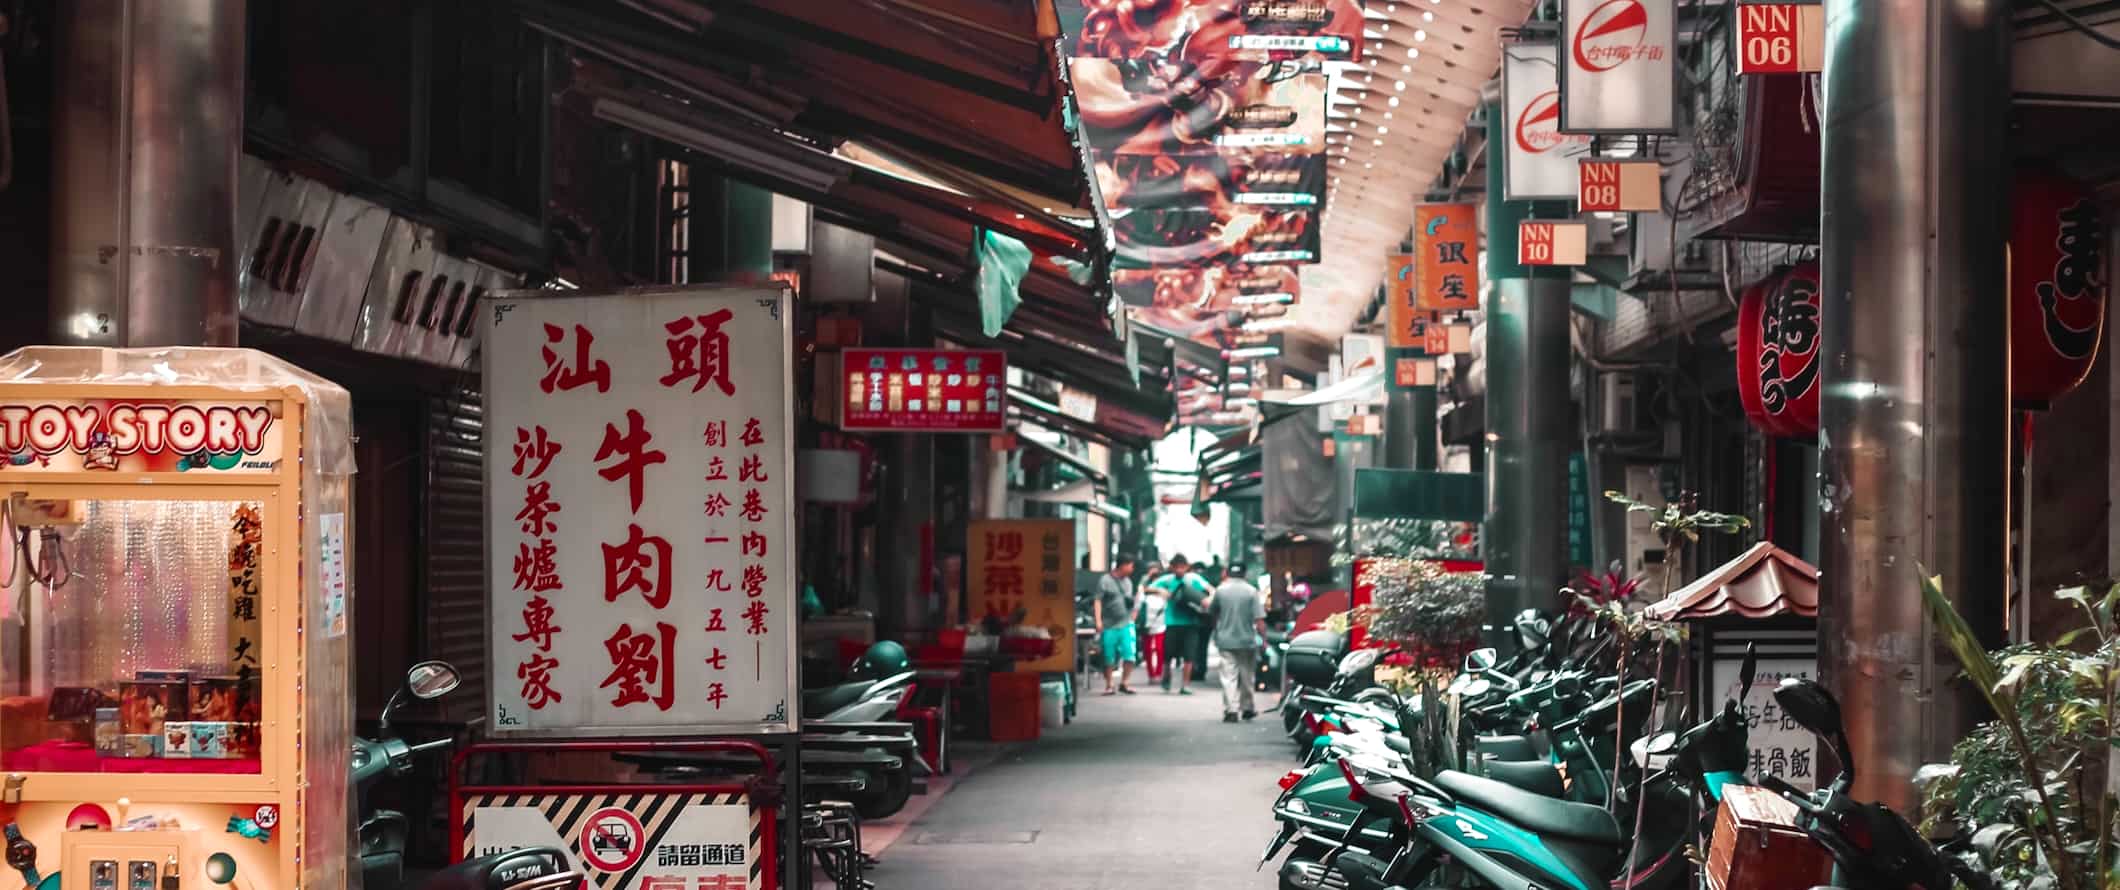 A narrow alley lined with scooters and shops in busy Taiwan